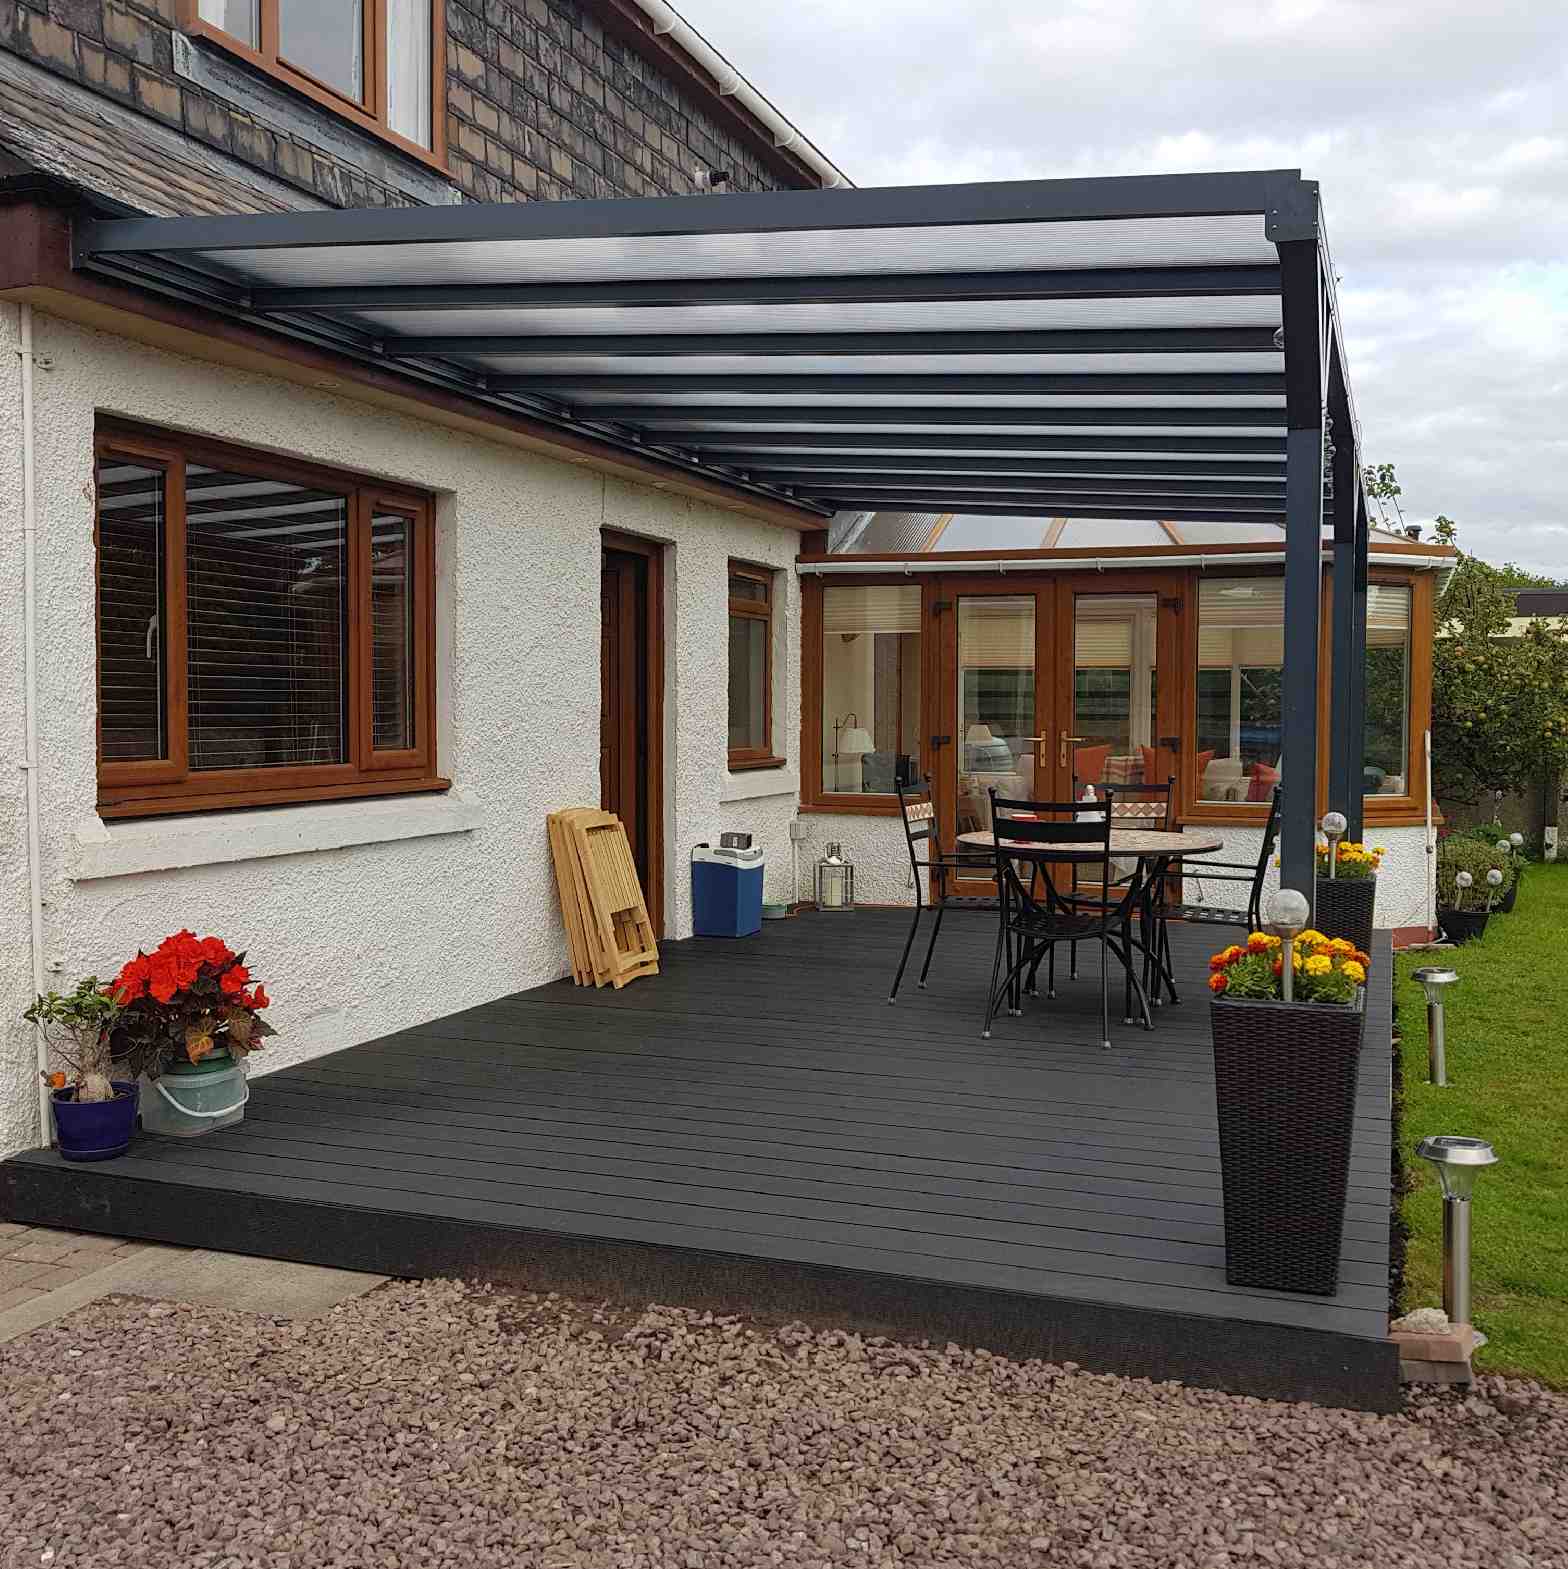 Buy Omega Verandah, Anthracite Grey, 16mm Polycarbonate Glazing - 11.4m (W) x 4.0m (P), (5) Supporting Posts online today